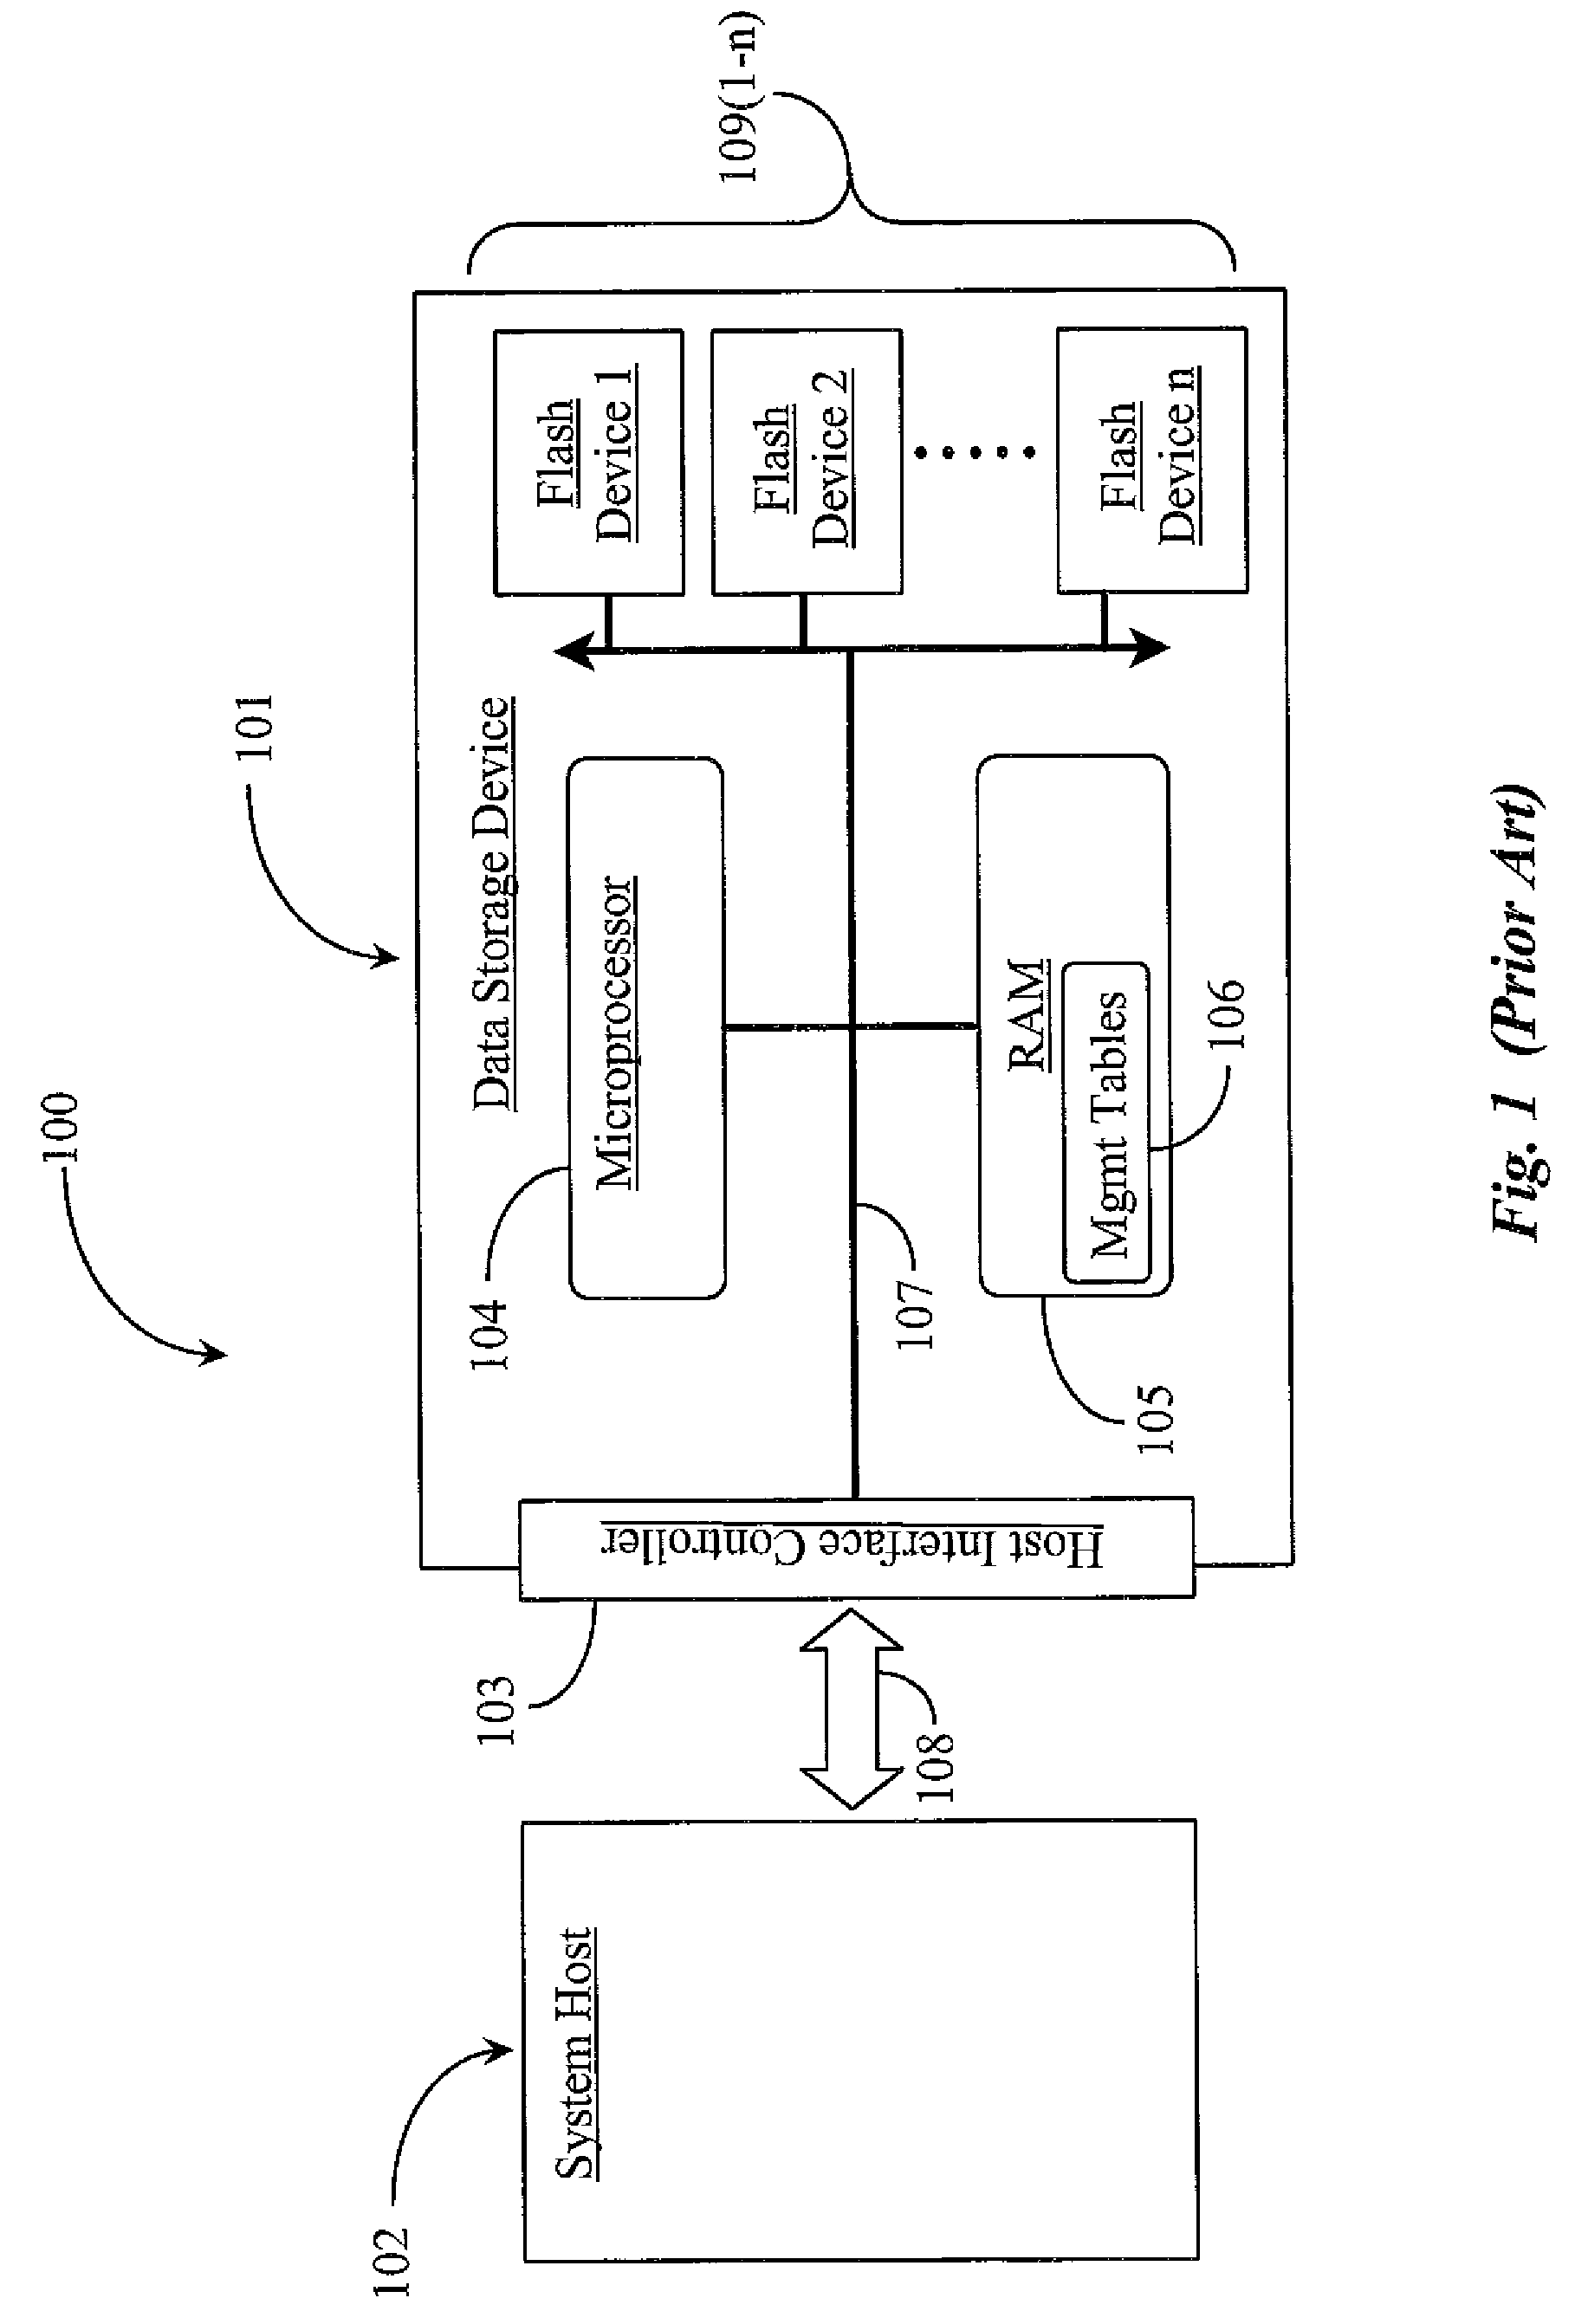 Multi-Processor Flash Memory Storage Device and Management System